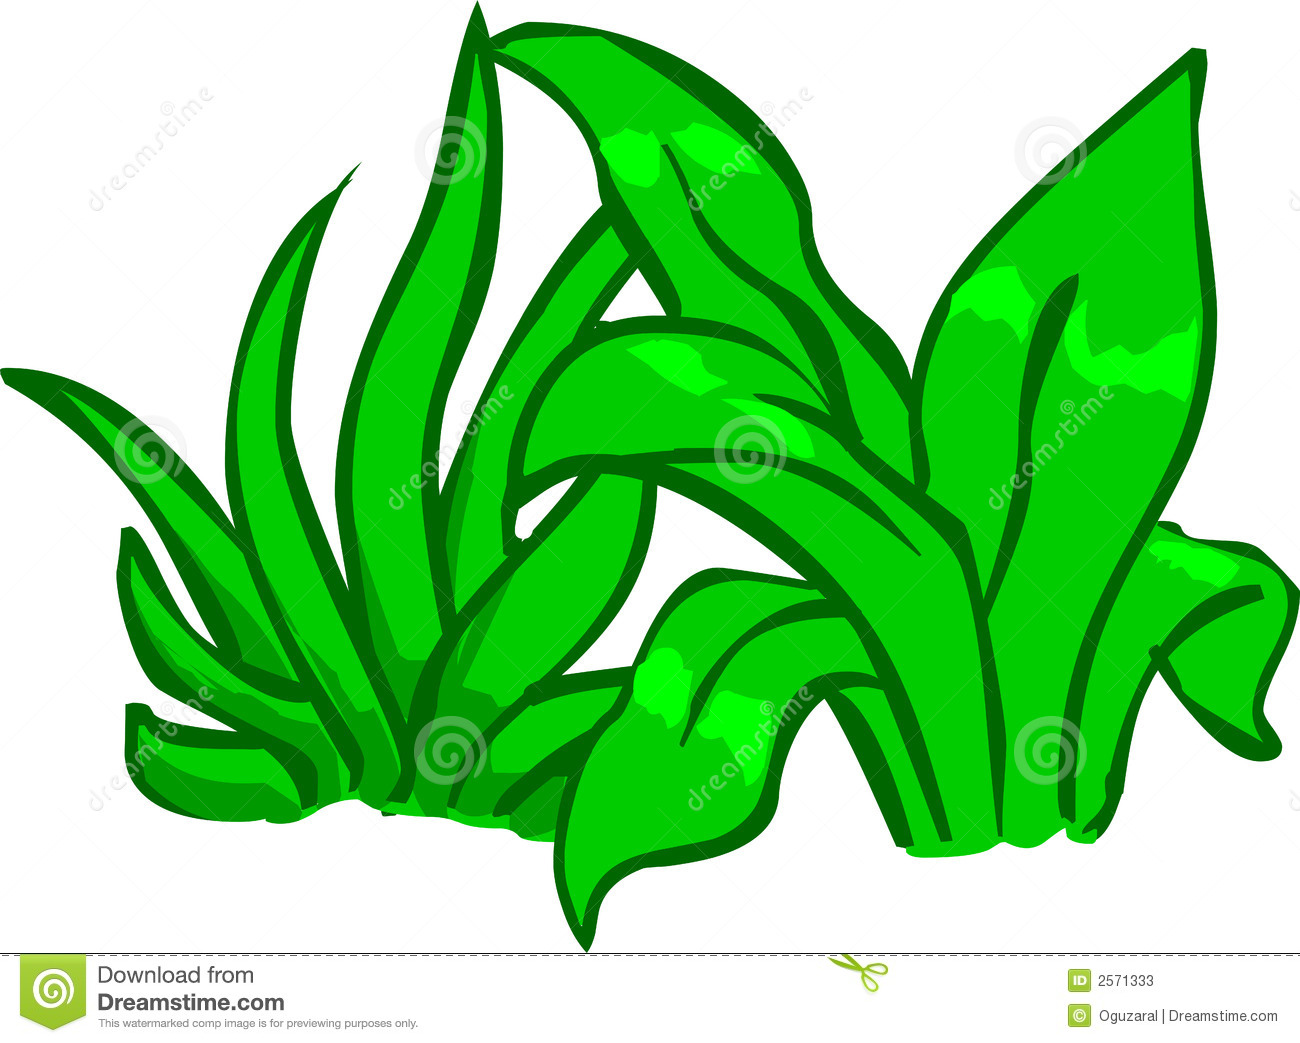 Bushes clipart animated.